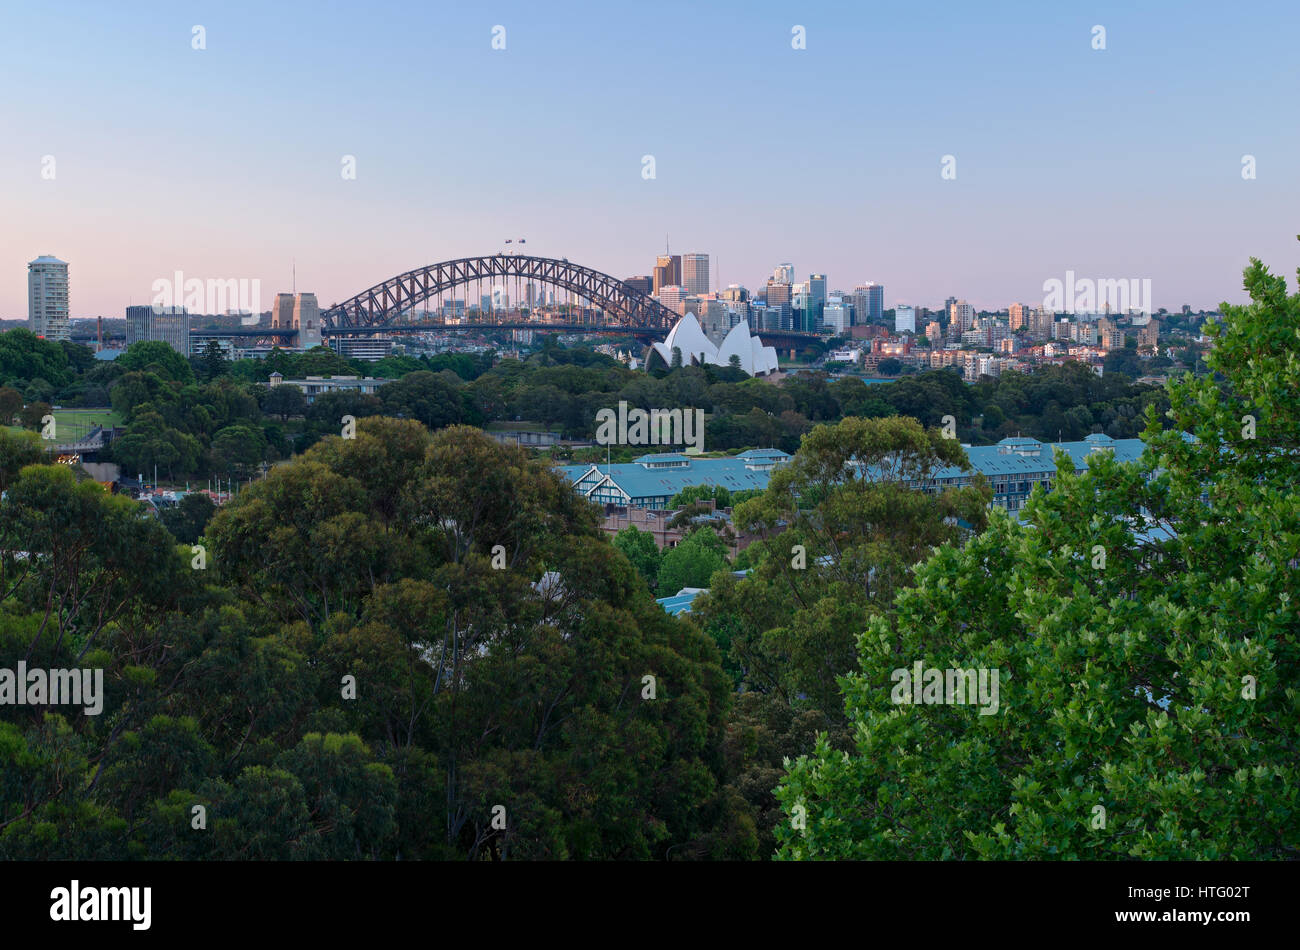 city skyline with buildings landmarks downtown harbor and trees of sydney in new south wales australia Stock Photo